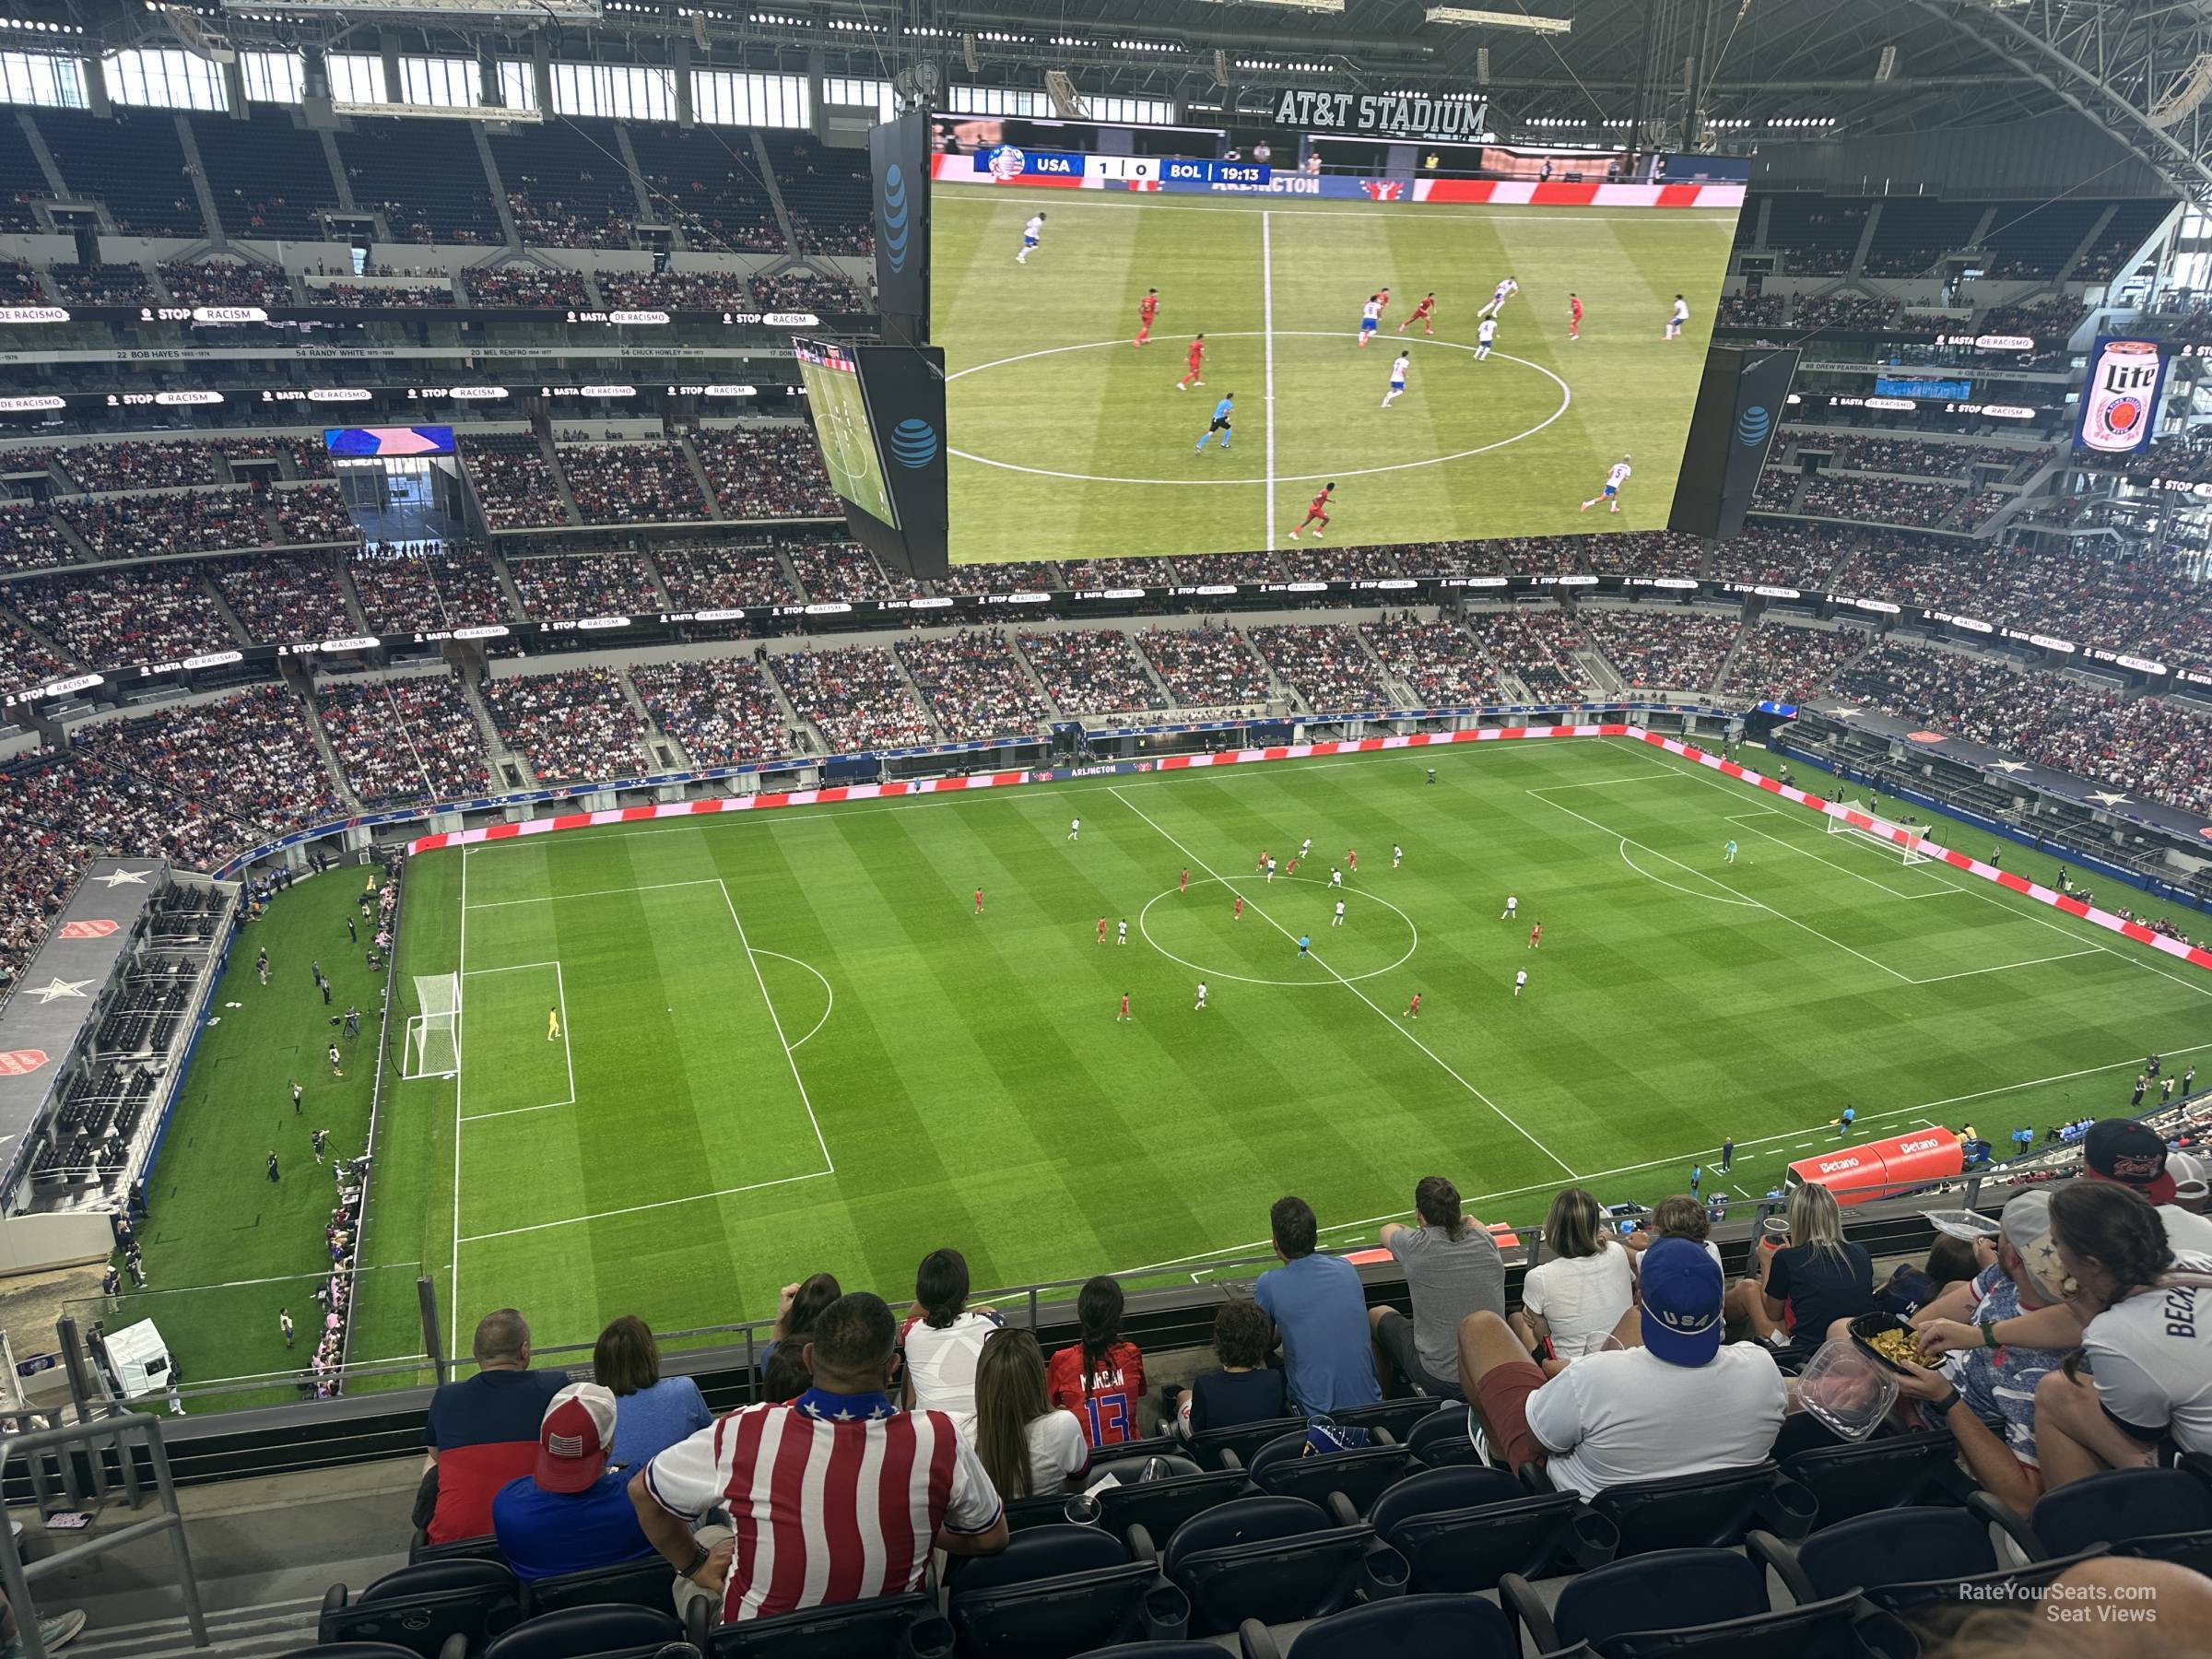 section 446, row 6 seat view  for soccer - at&t stadium (cowboys stadium)